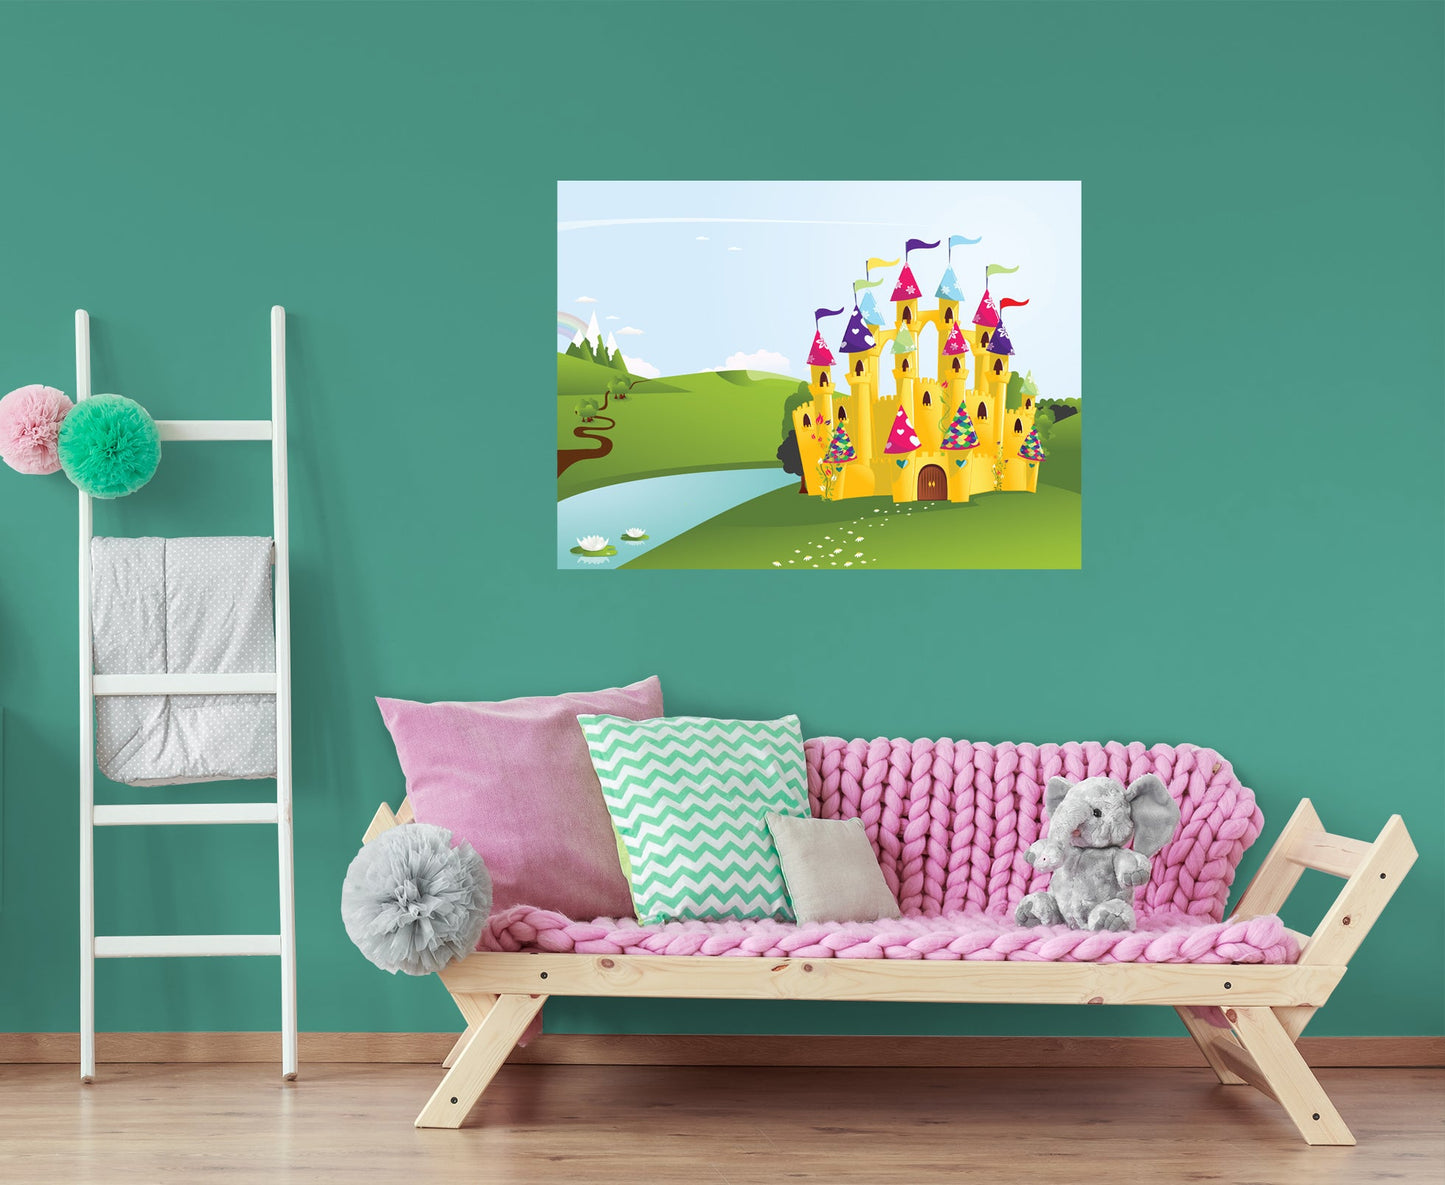 Nursery Princess:  Castle Part 1 Mural        -   Removable Wall   Adhesive Decal